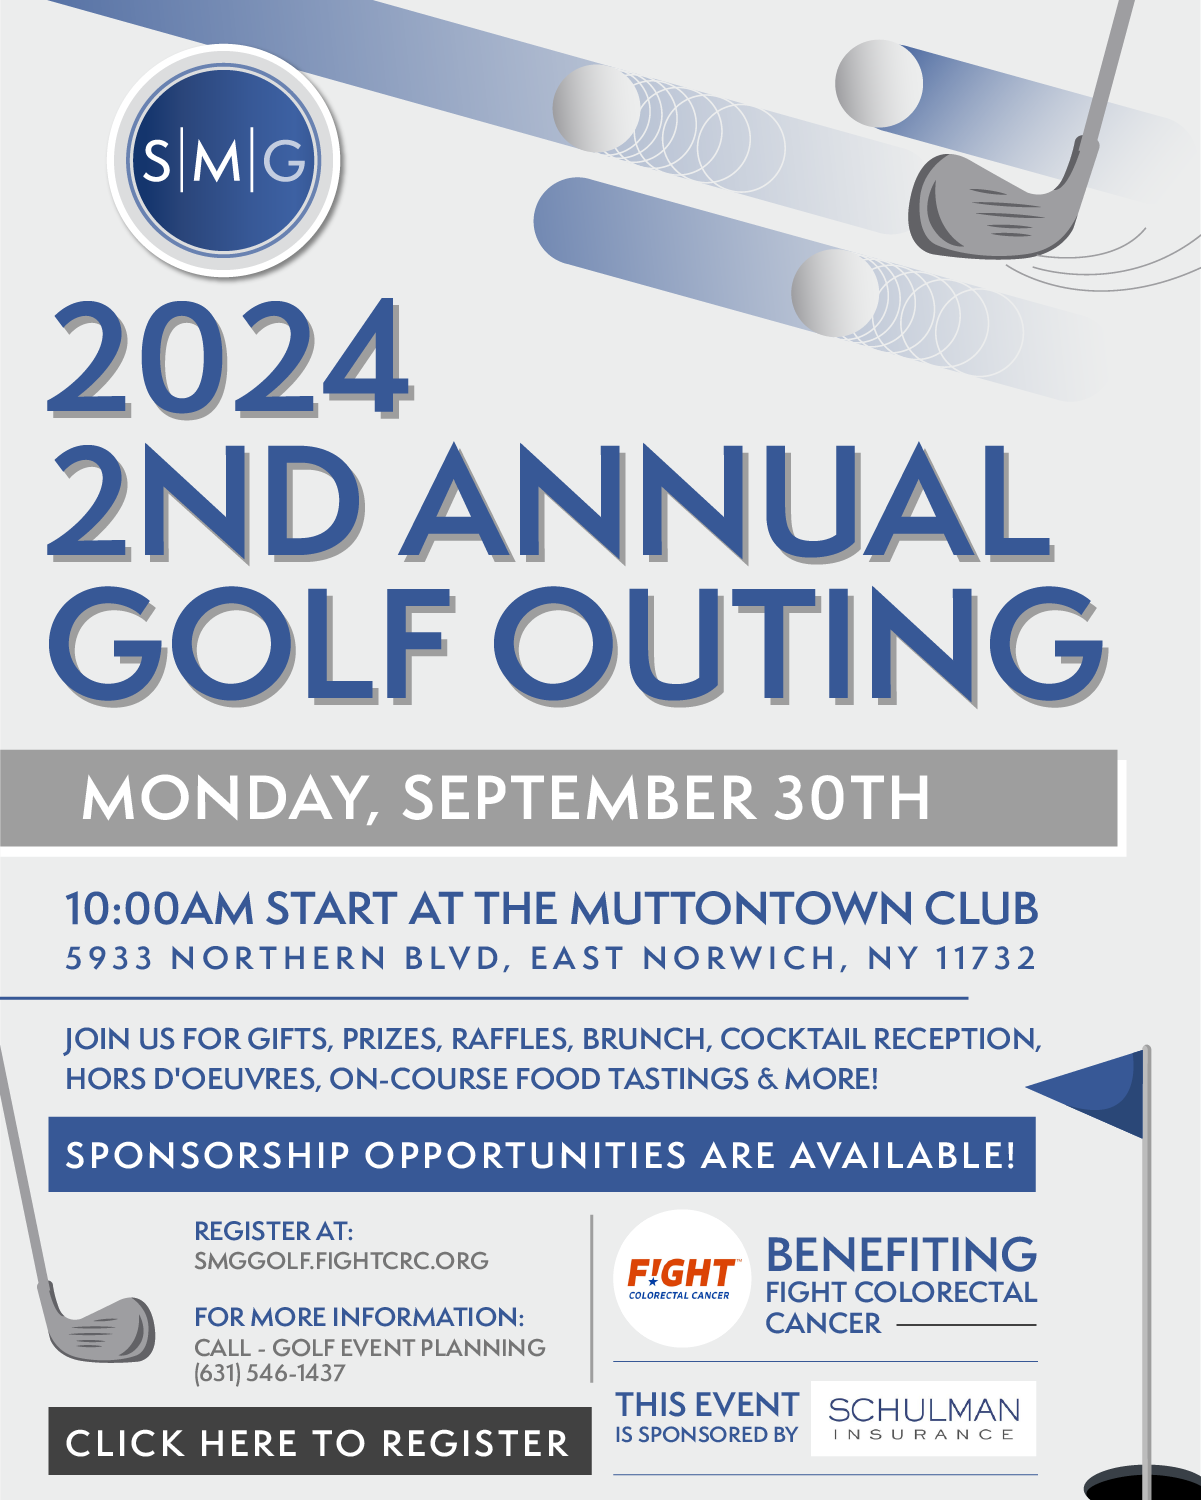 2024 2ND ANNUAL GOLF OUTING MONDAY, SEPTEMBER 30TH 10:00AM START AT THE MUTTONTOWN CLUB 5933 NORTHERN BLD, EAST NORWICH, NY 11732 JOIN US FOR GIFTS, PRIZES, RAFFLES, BRUNCH, COCKTAIL RECEPTION, HORS D'OEUVRES, ON-COURSE FOOD TASTINGS & MORE! SPONSORSHIP OPPORTUNITIES ARE AVAILABLE! REGISTER AT: SMGGOLF.FIGHTCRC.ORG BENEFITING FIGHT COLORECTAL CANCER FIGHT COLORECTAL FOR MORE INFORMATION: CANCER CALL - GOLF EVENT PLANNING [631) 546-1437 CLICK HERE TO REGISTER THIS EVENT SCHULMAN IS SPONSORED BY INSURANCE